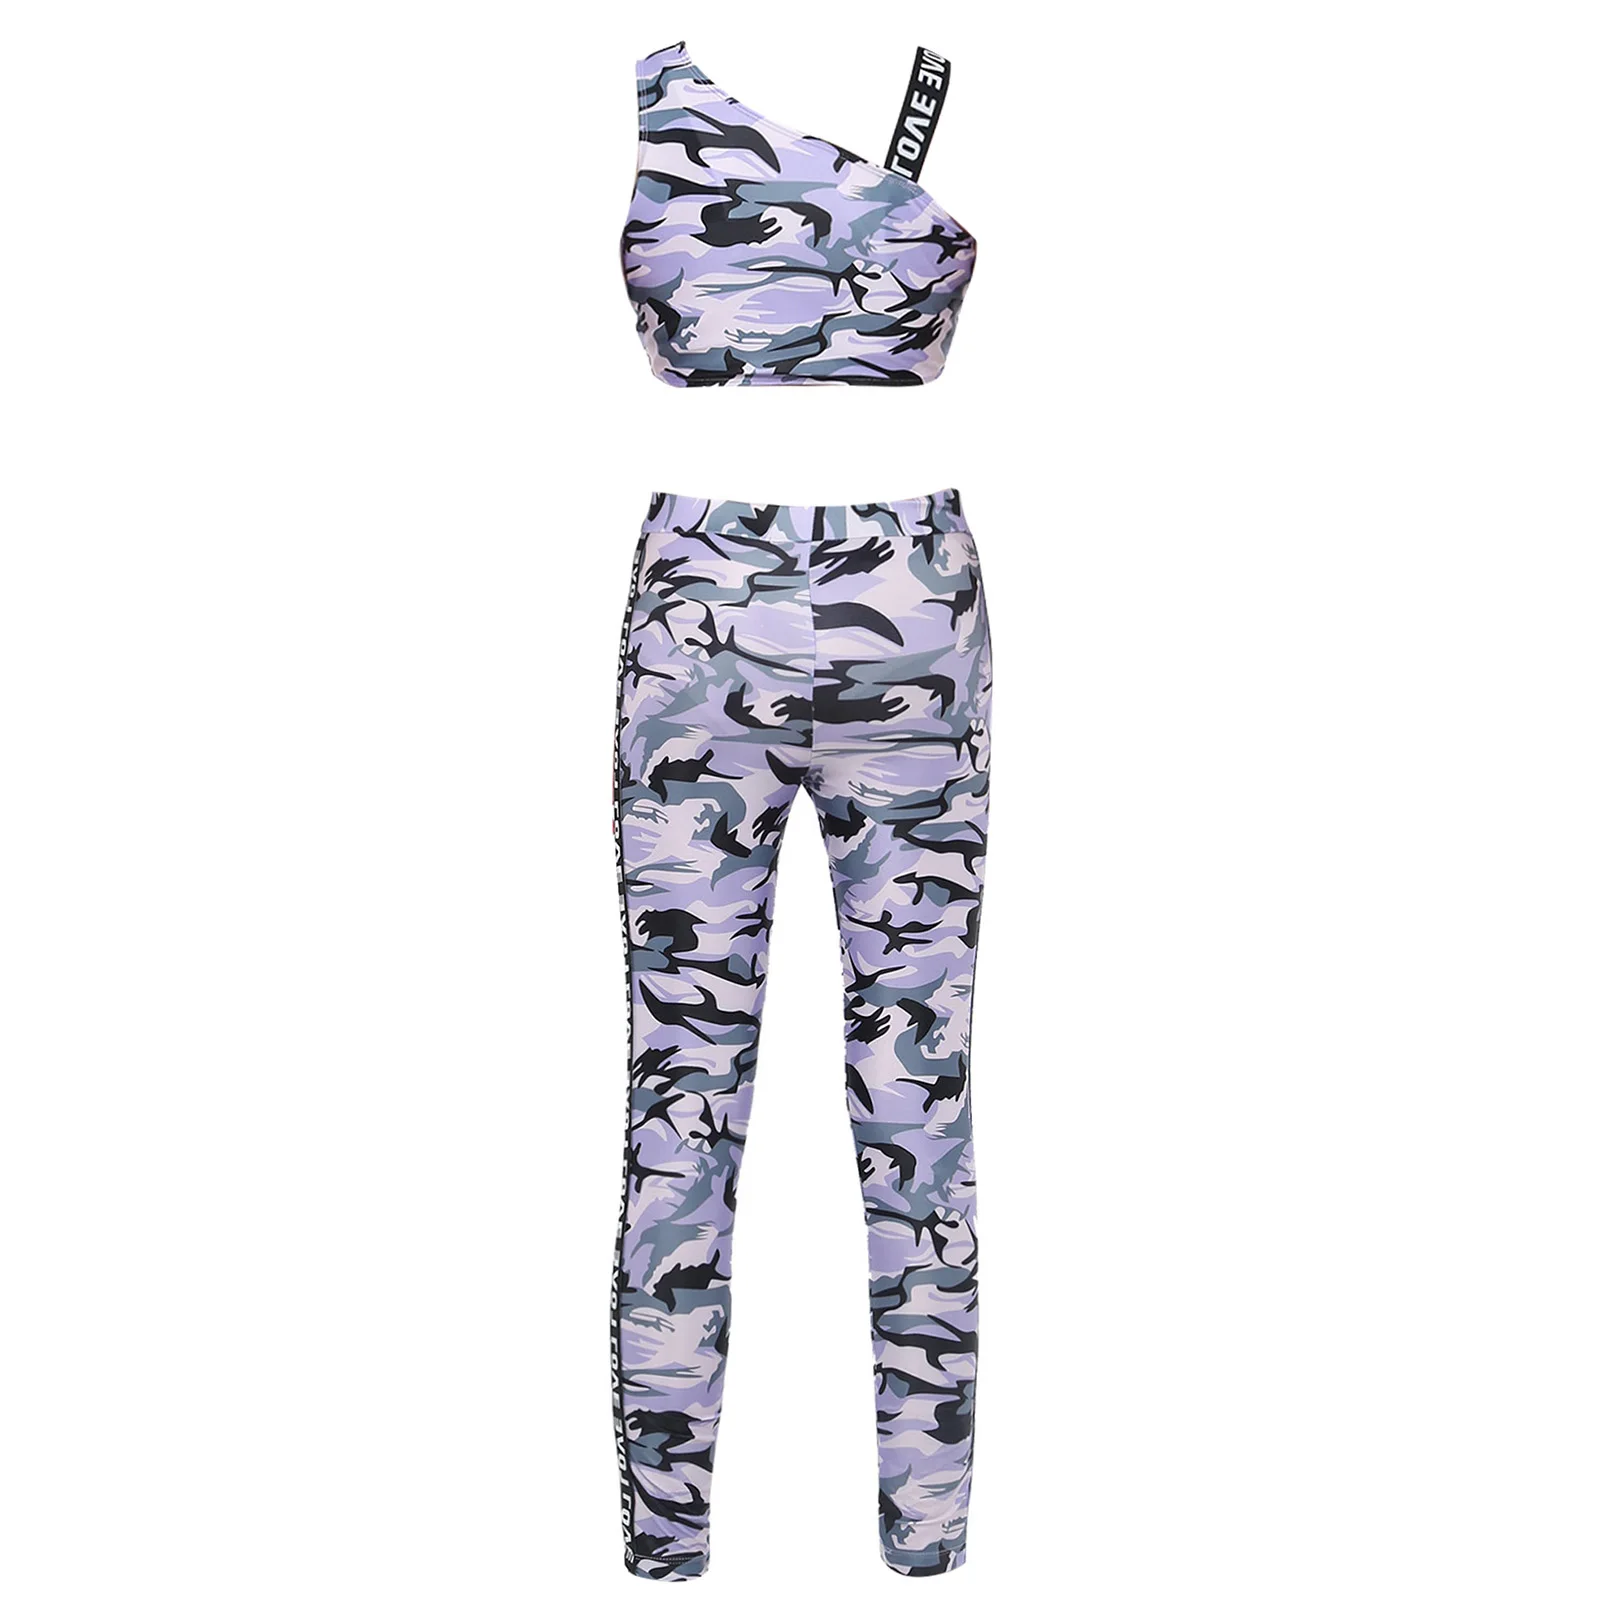 TTAO Kids Girls Camouflage Crop Tops with Athletic Leggings Yoga Sports Workout Gymnastics Tracksuit 